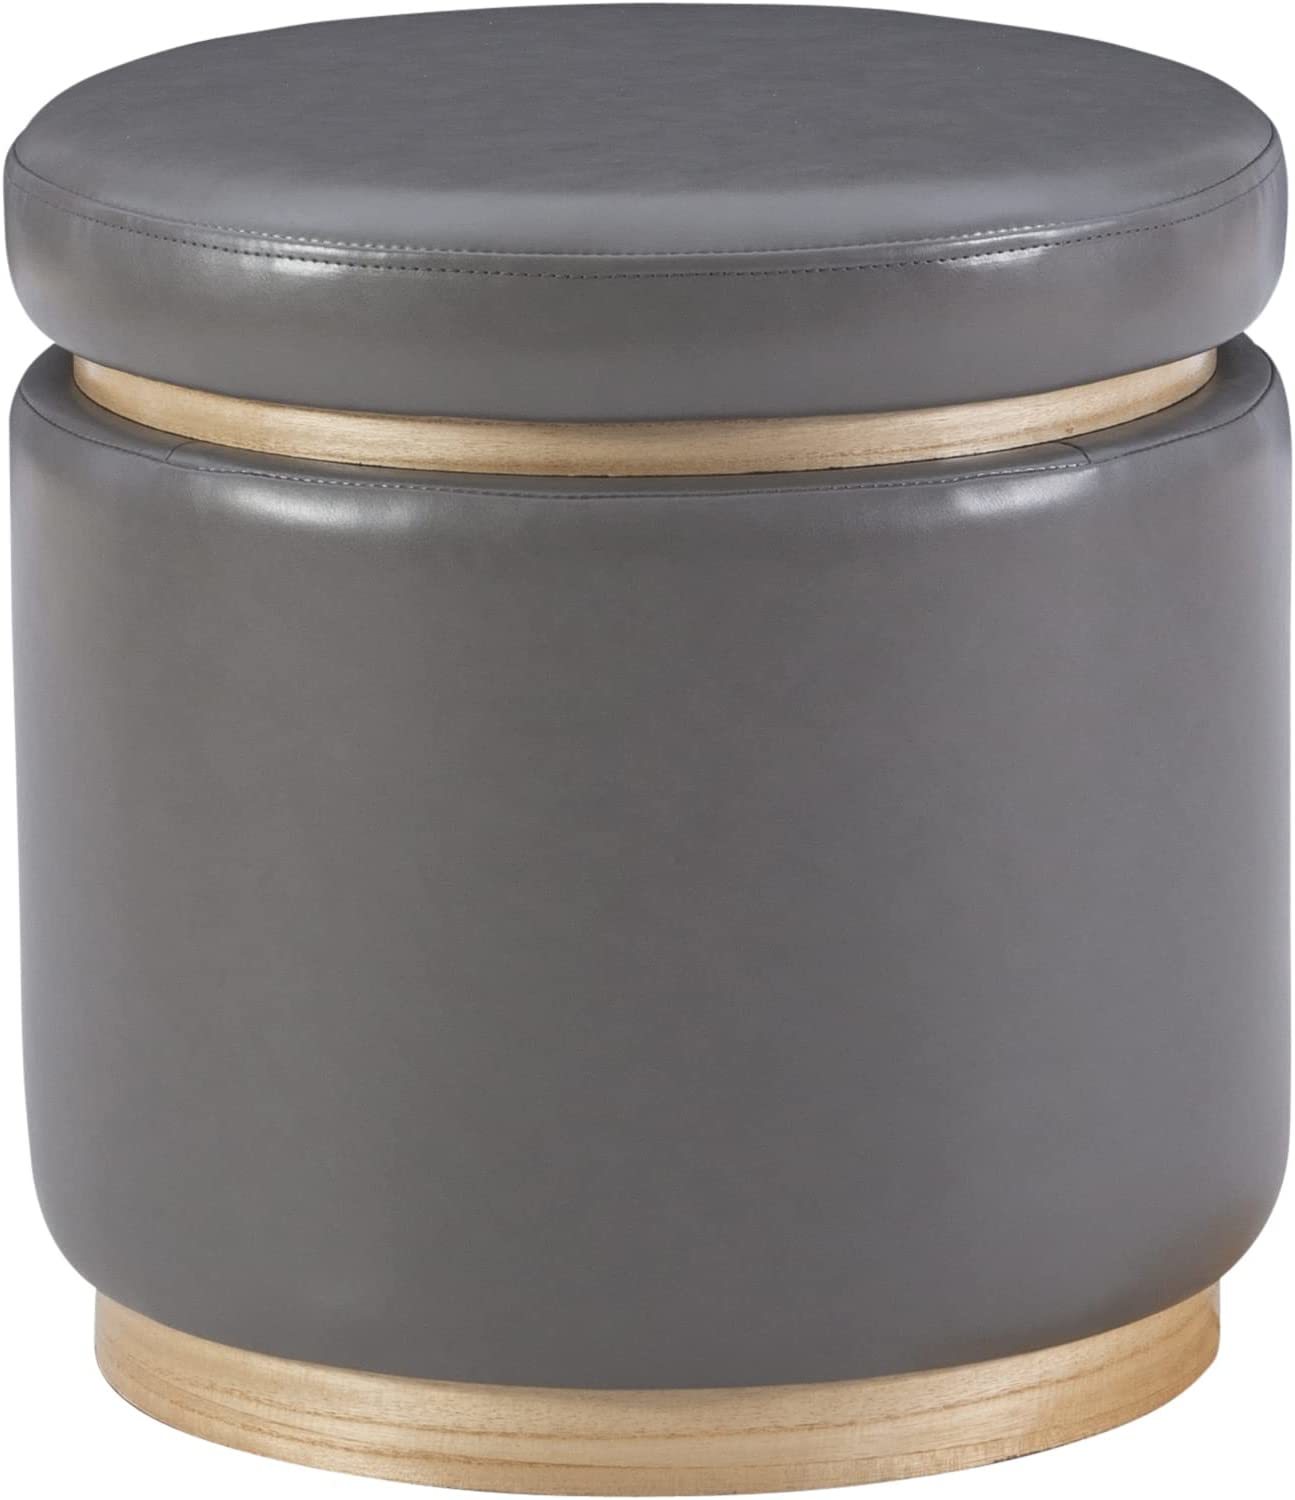 Lexington Grey Faux Leather Round Storage Ottoman with Wood Accent by Linon - $106.99